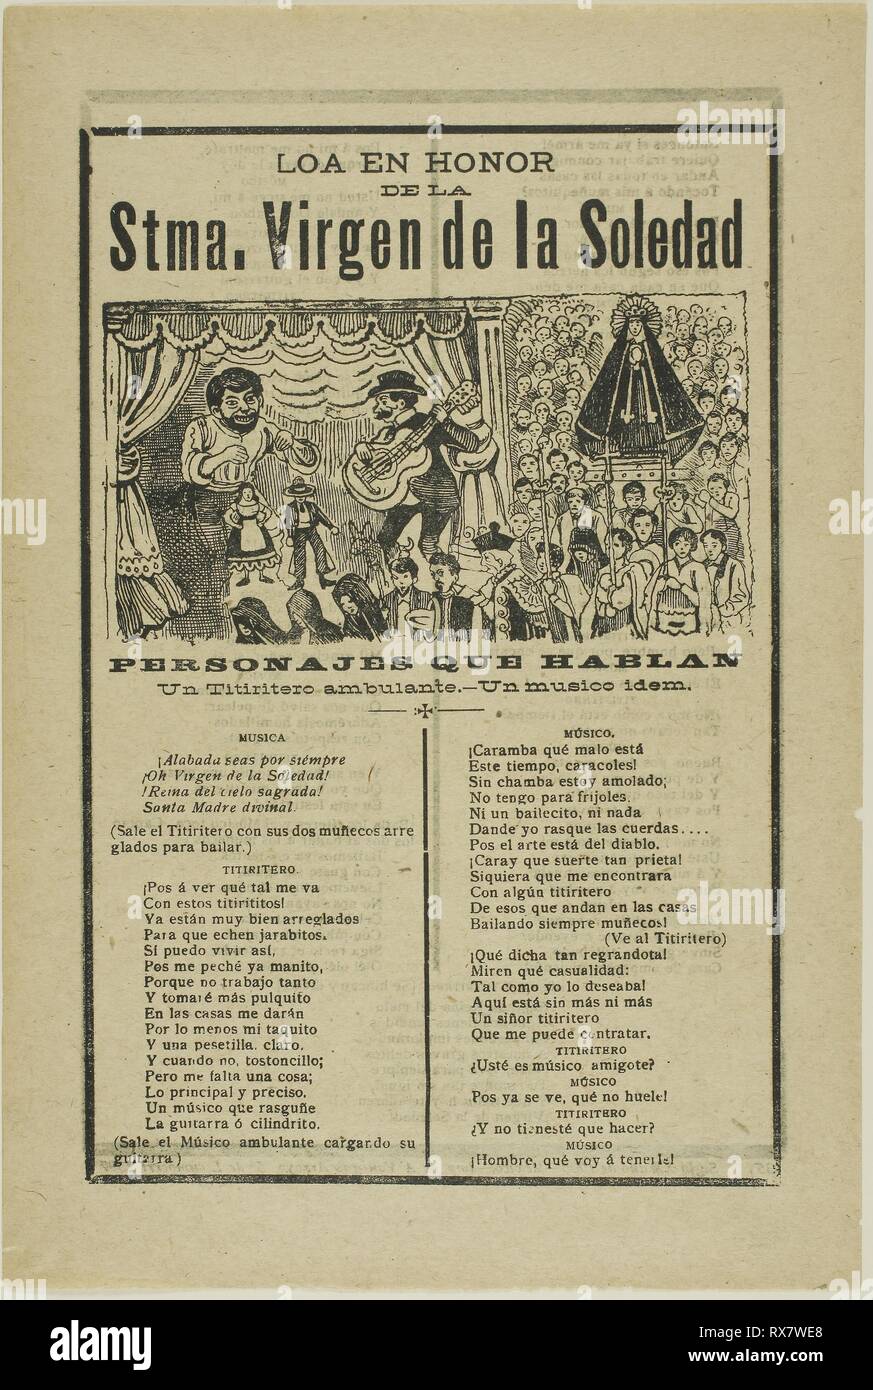 José Guadalupe Posada, Broadsheet relating to the apparition of a comet in  Mexico in November 1899, and the words to a song 'La Paloma Azul